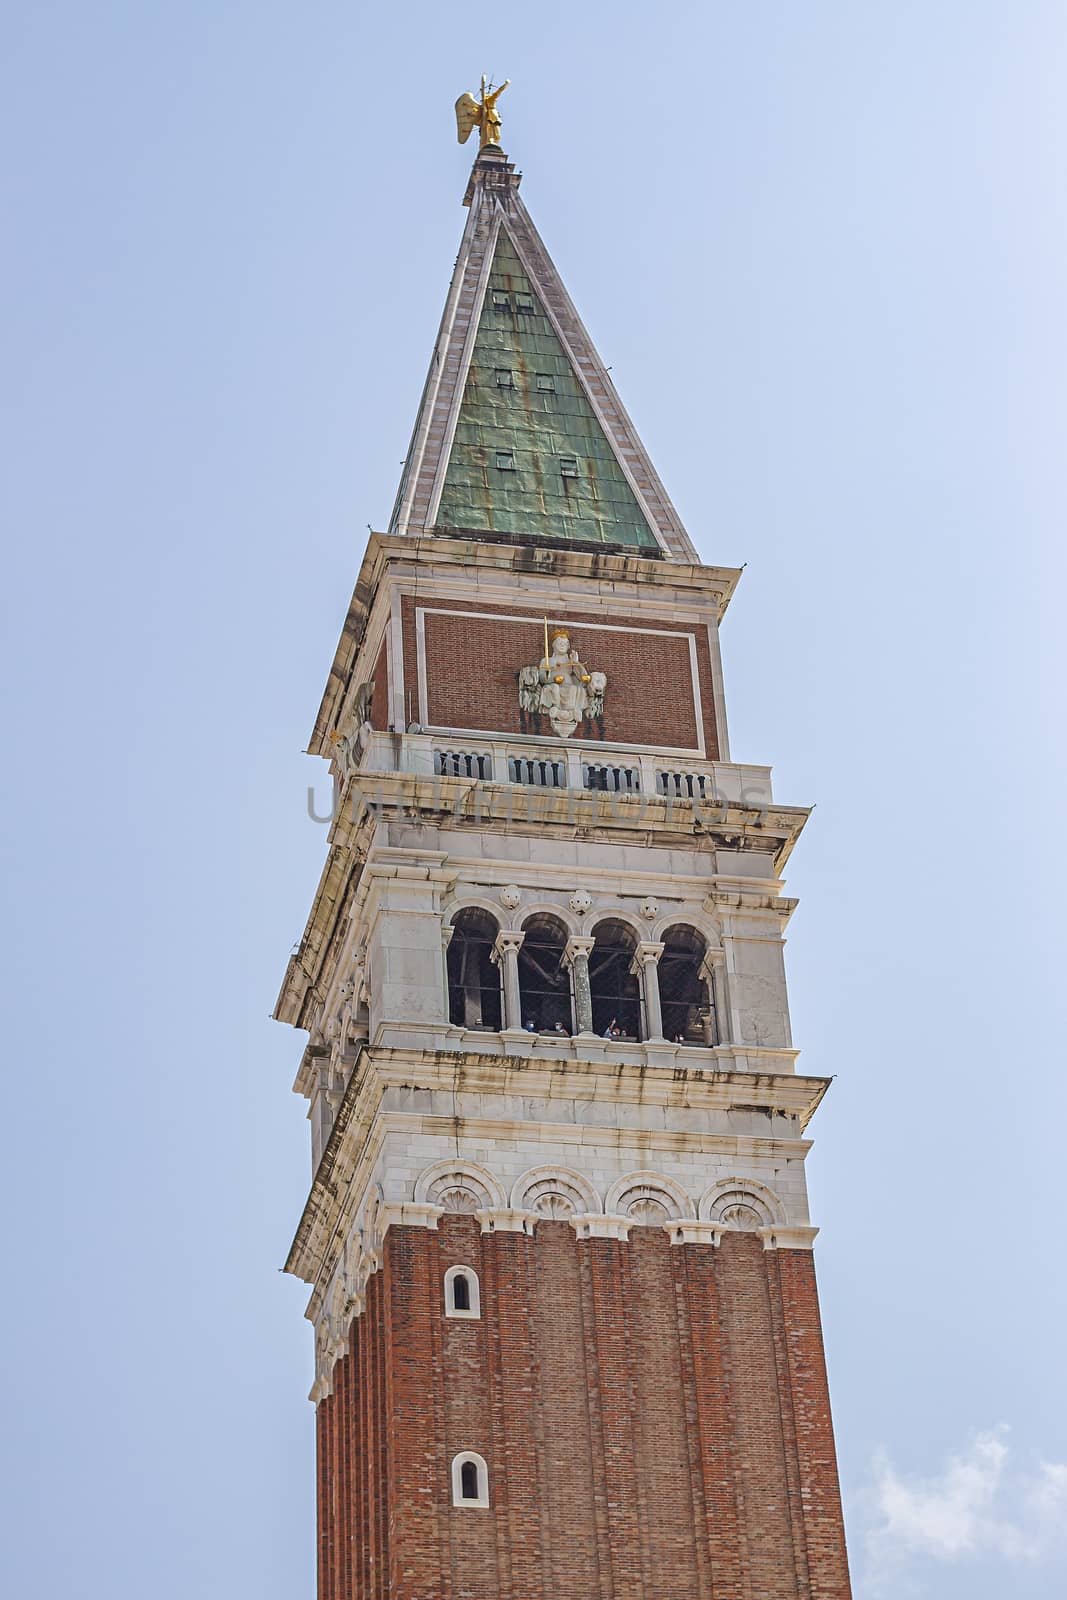 Saint Mark bell tower in Venice by pippocarlot